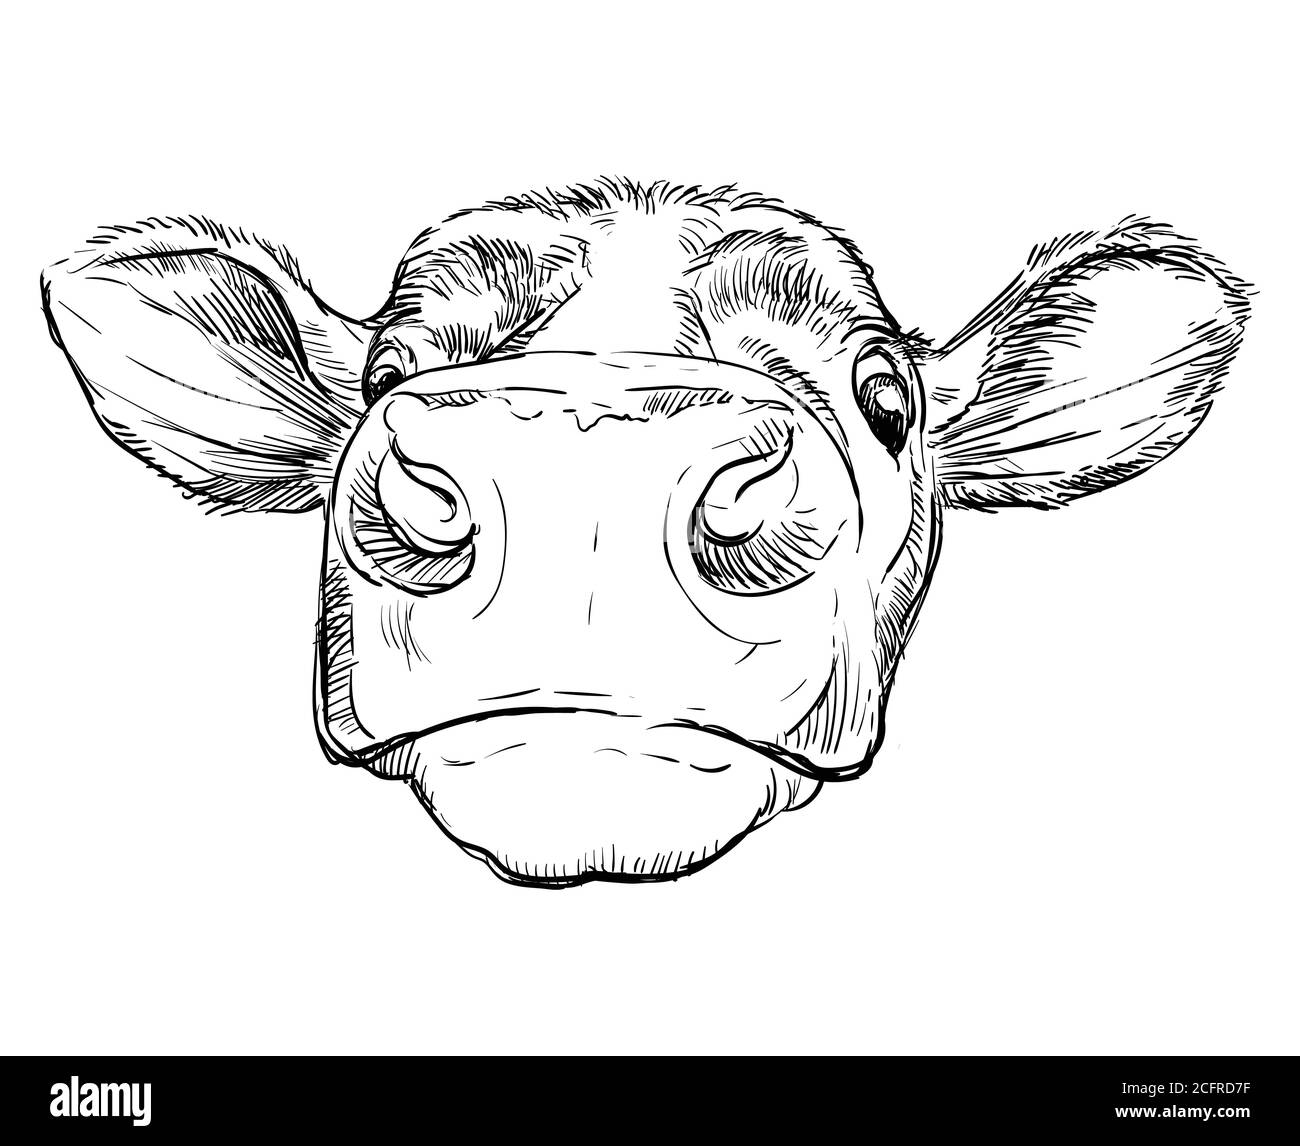 Illustration with cow skull. Stock Vector by ©rednex 92654910